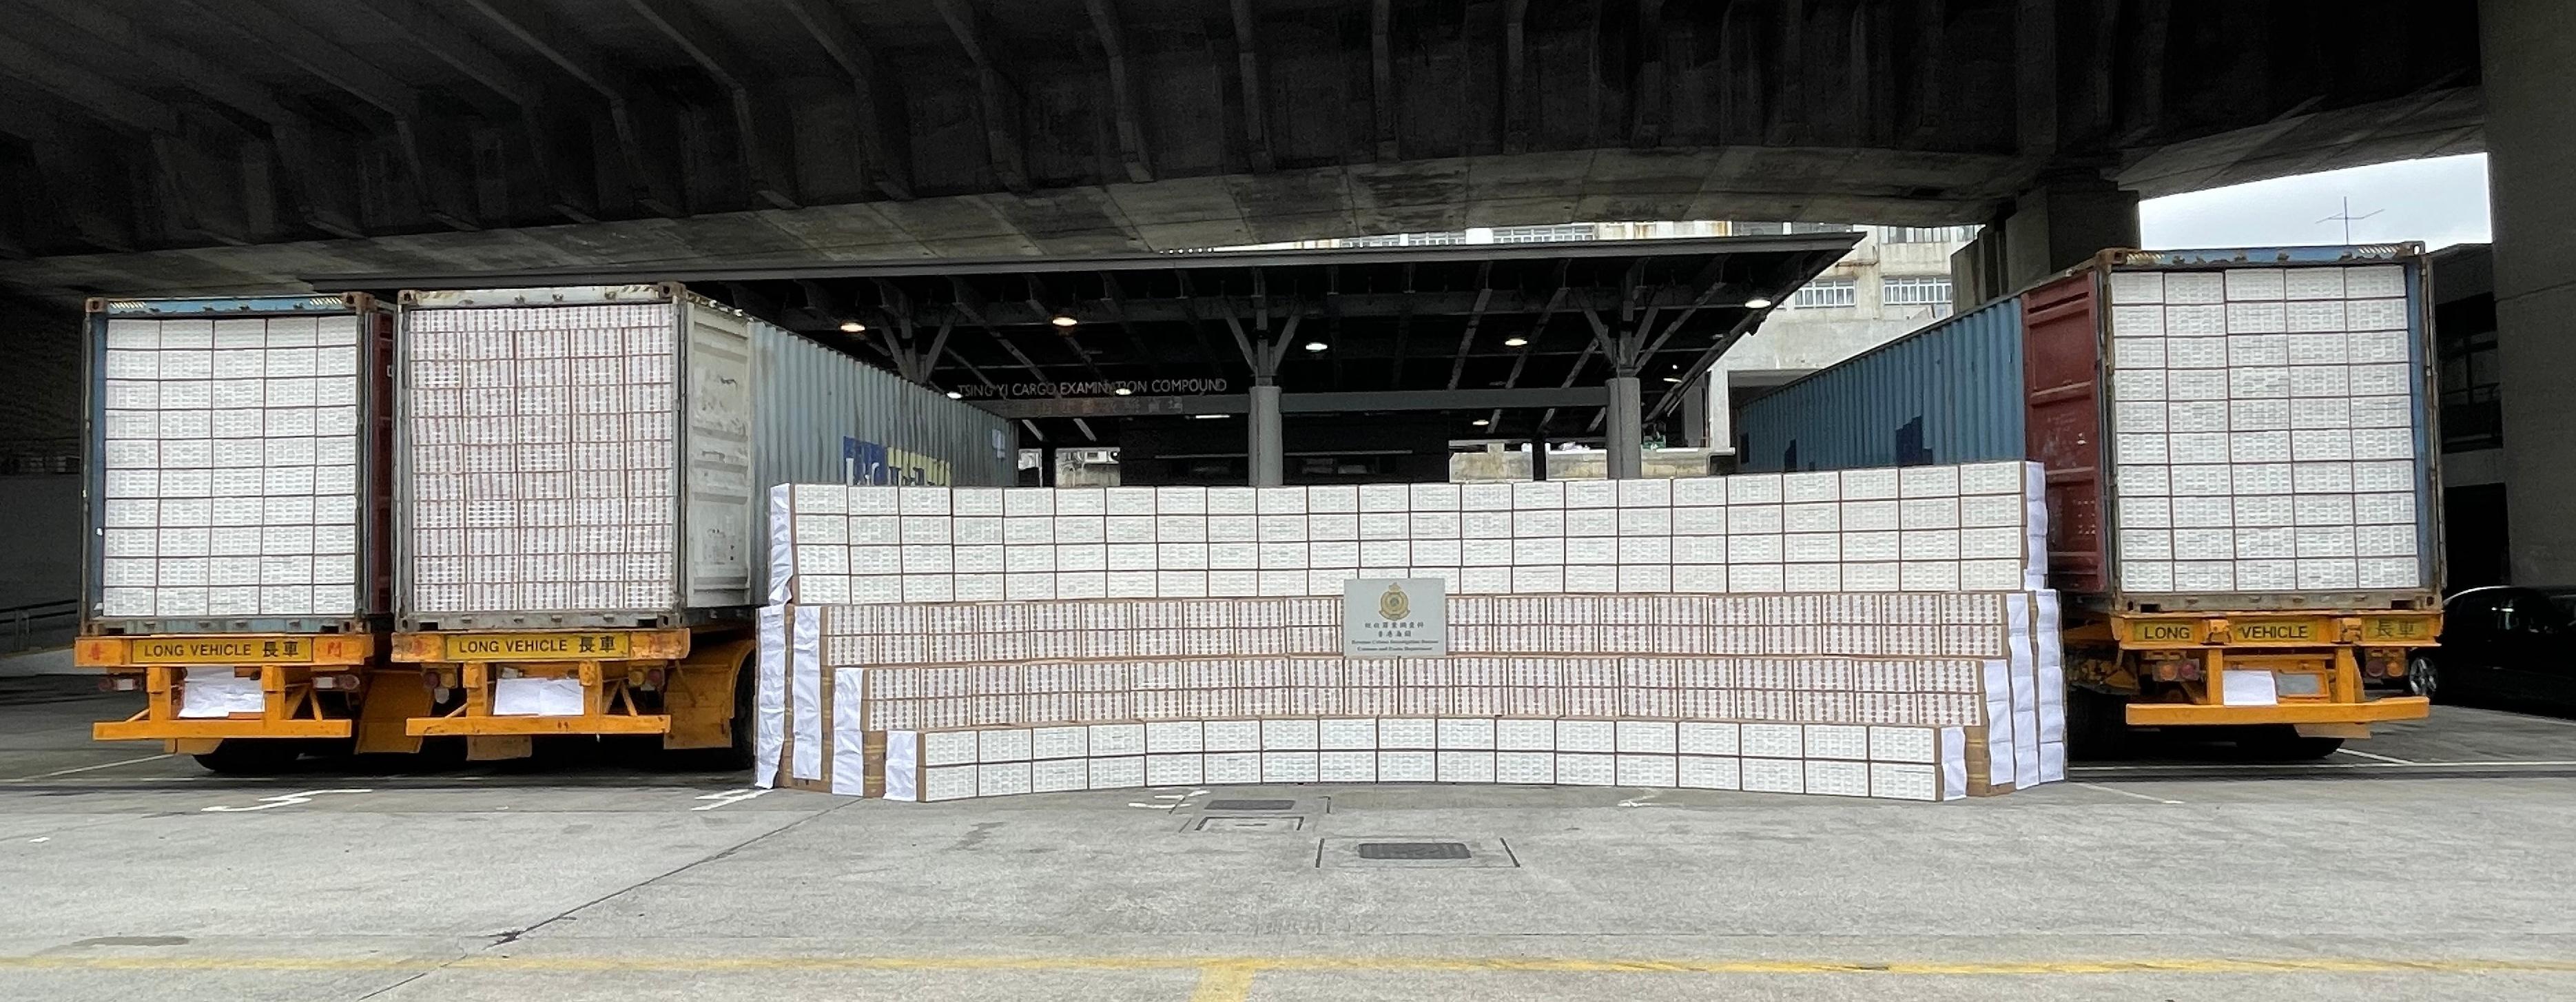 Hong Kong Customs on May 10 detected a large-scale illicit cigarette smuggling case and seized about 32 million suspected illicit cigarettes, with an estimated market value of about $120 million and a duty potential of about $79 million, in Tuen Mun. Photo shows the suspected illicit cigarettes seized.